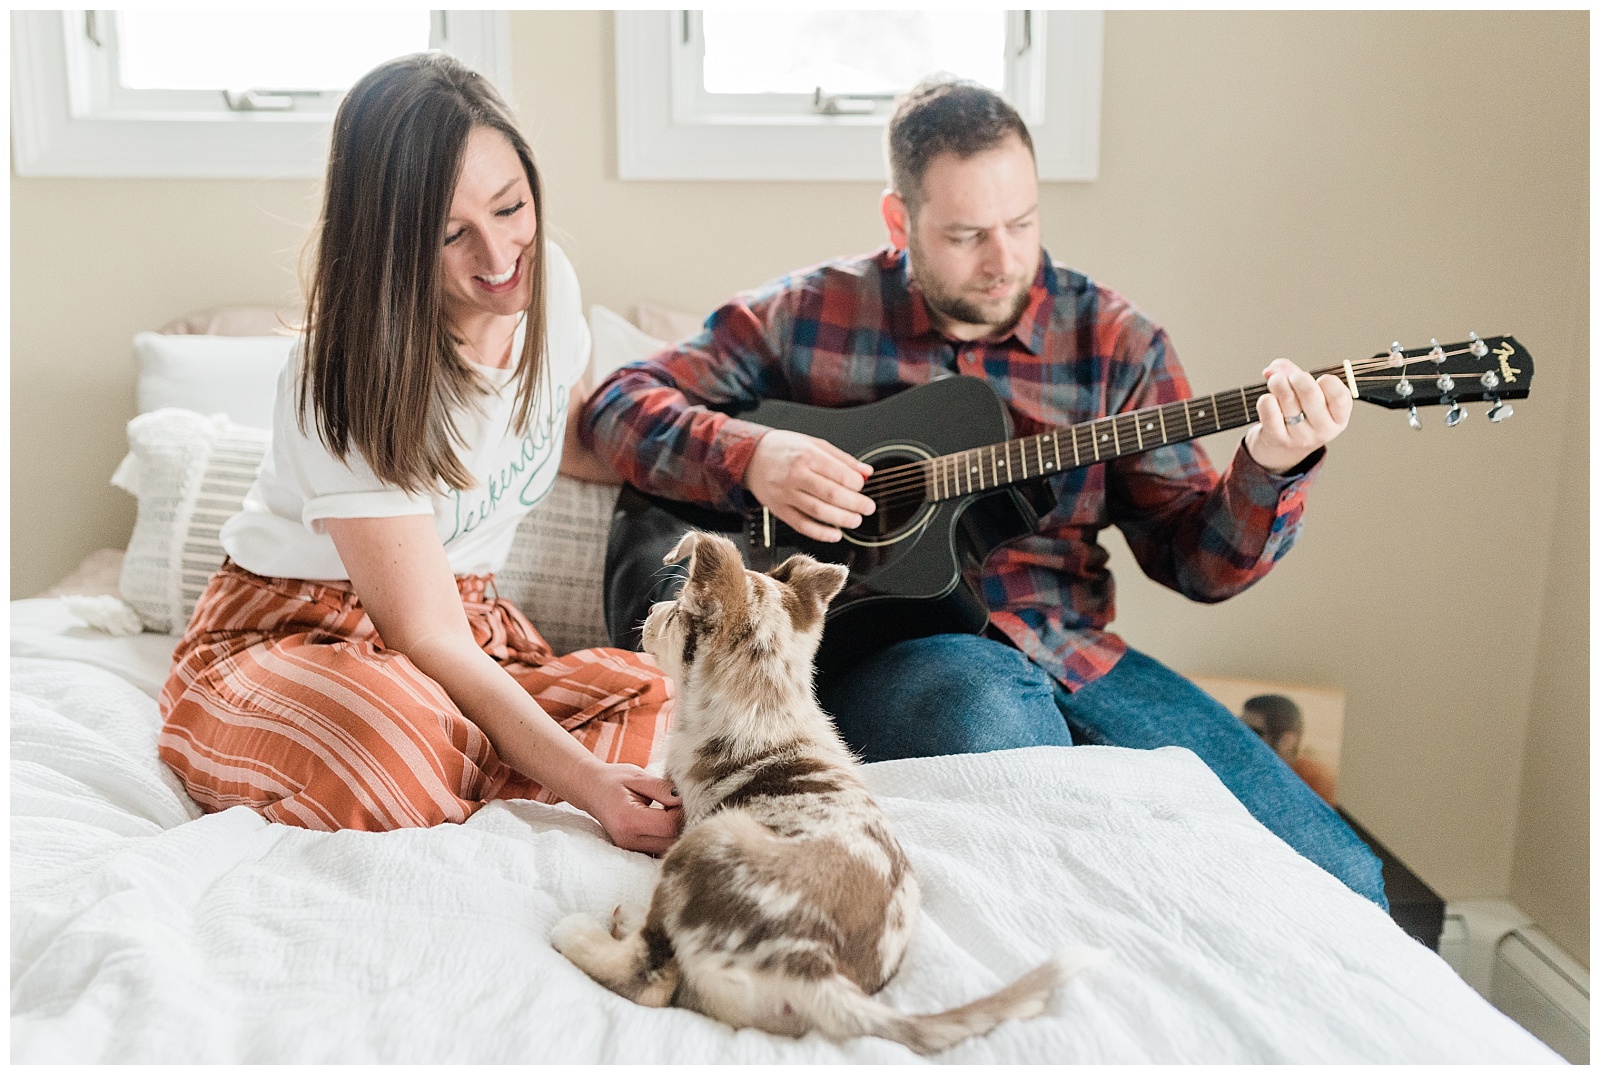 In home photo session, new puppy, casual, weekend, new jersey lifestyle, natural light photographer, guitar playing